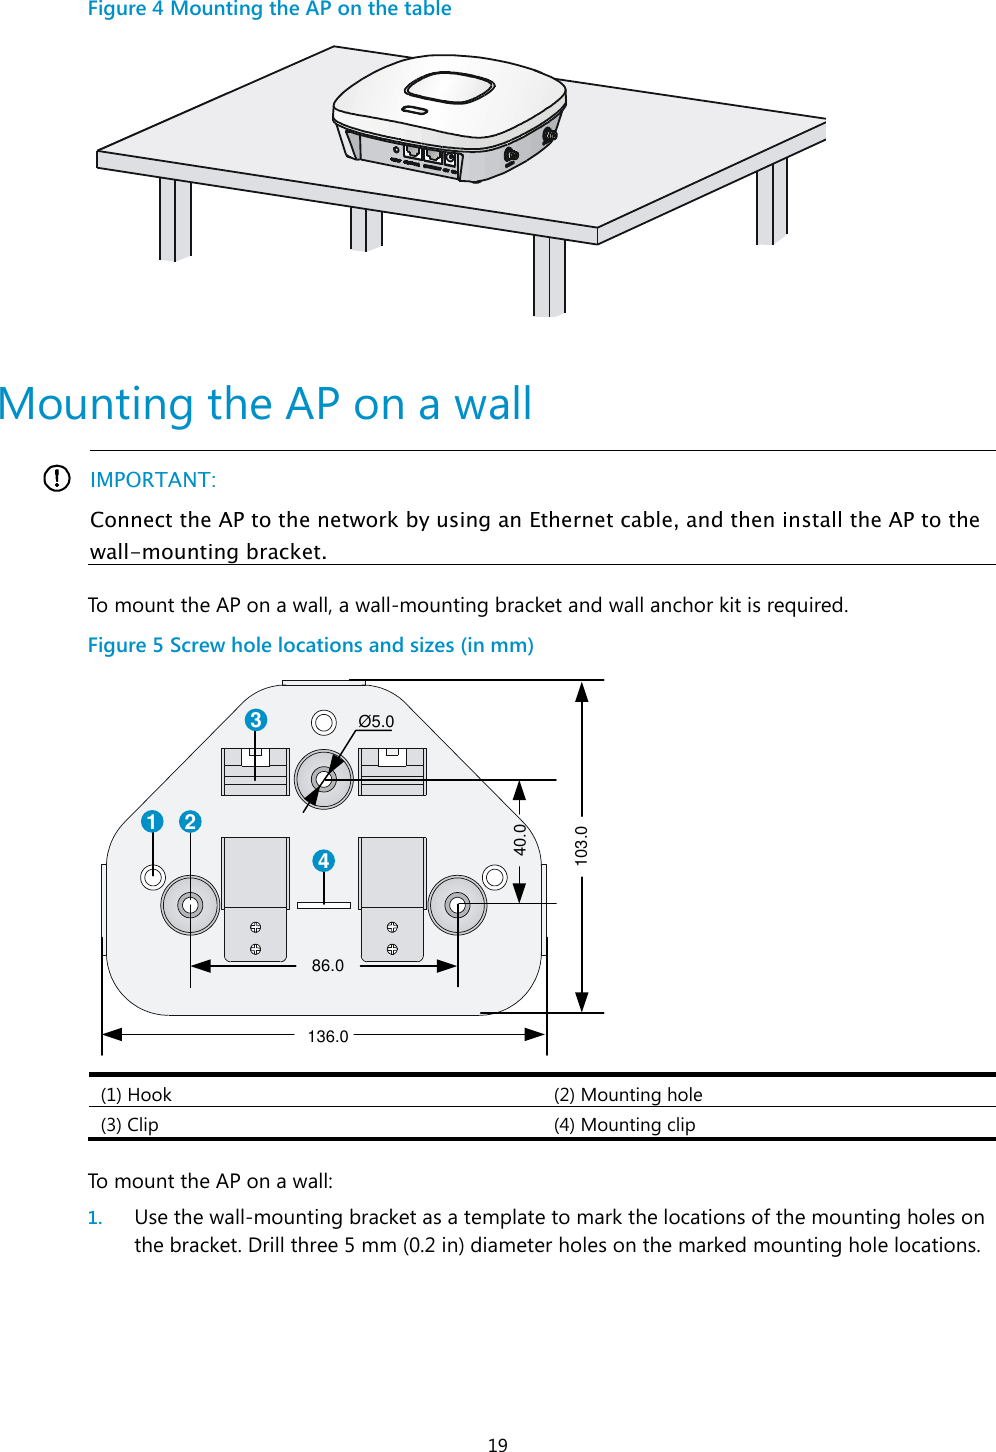  19 Figure 4 Mounting the AP on the table   Mounting the AP on a wall   IMPORTANT: Connect the AP to the network by using an Ethernet cable, and then install the AP to the wall-mounting bracket.  To mount the AP on a wall, a wall-mounting bracket and wall anchor kit is required. Figure 5 Screw hole locations and sizes (in mm)  (1) Hook (2) Mounting hole (3) Clip (4) Mounting clip  To mount the AP on a wall: 1. Use the wall-mounting bracket as a template to mark the locations of the mounting holes on the bracket. Drill three 5 mm (0.2 in) diameter holes on the marked mounting hole locations. 1 234Ø 5.040.0103.086.0136.0